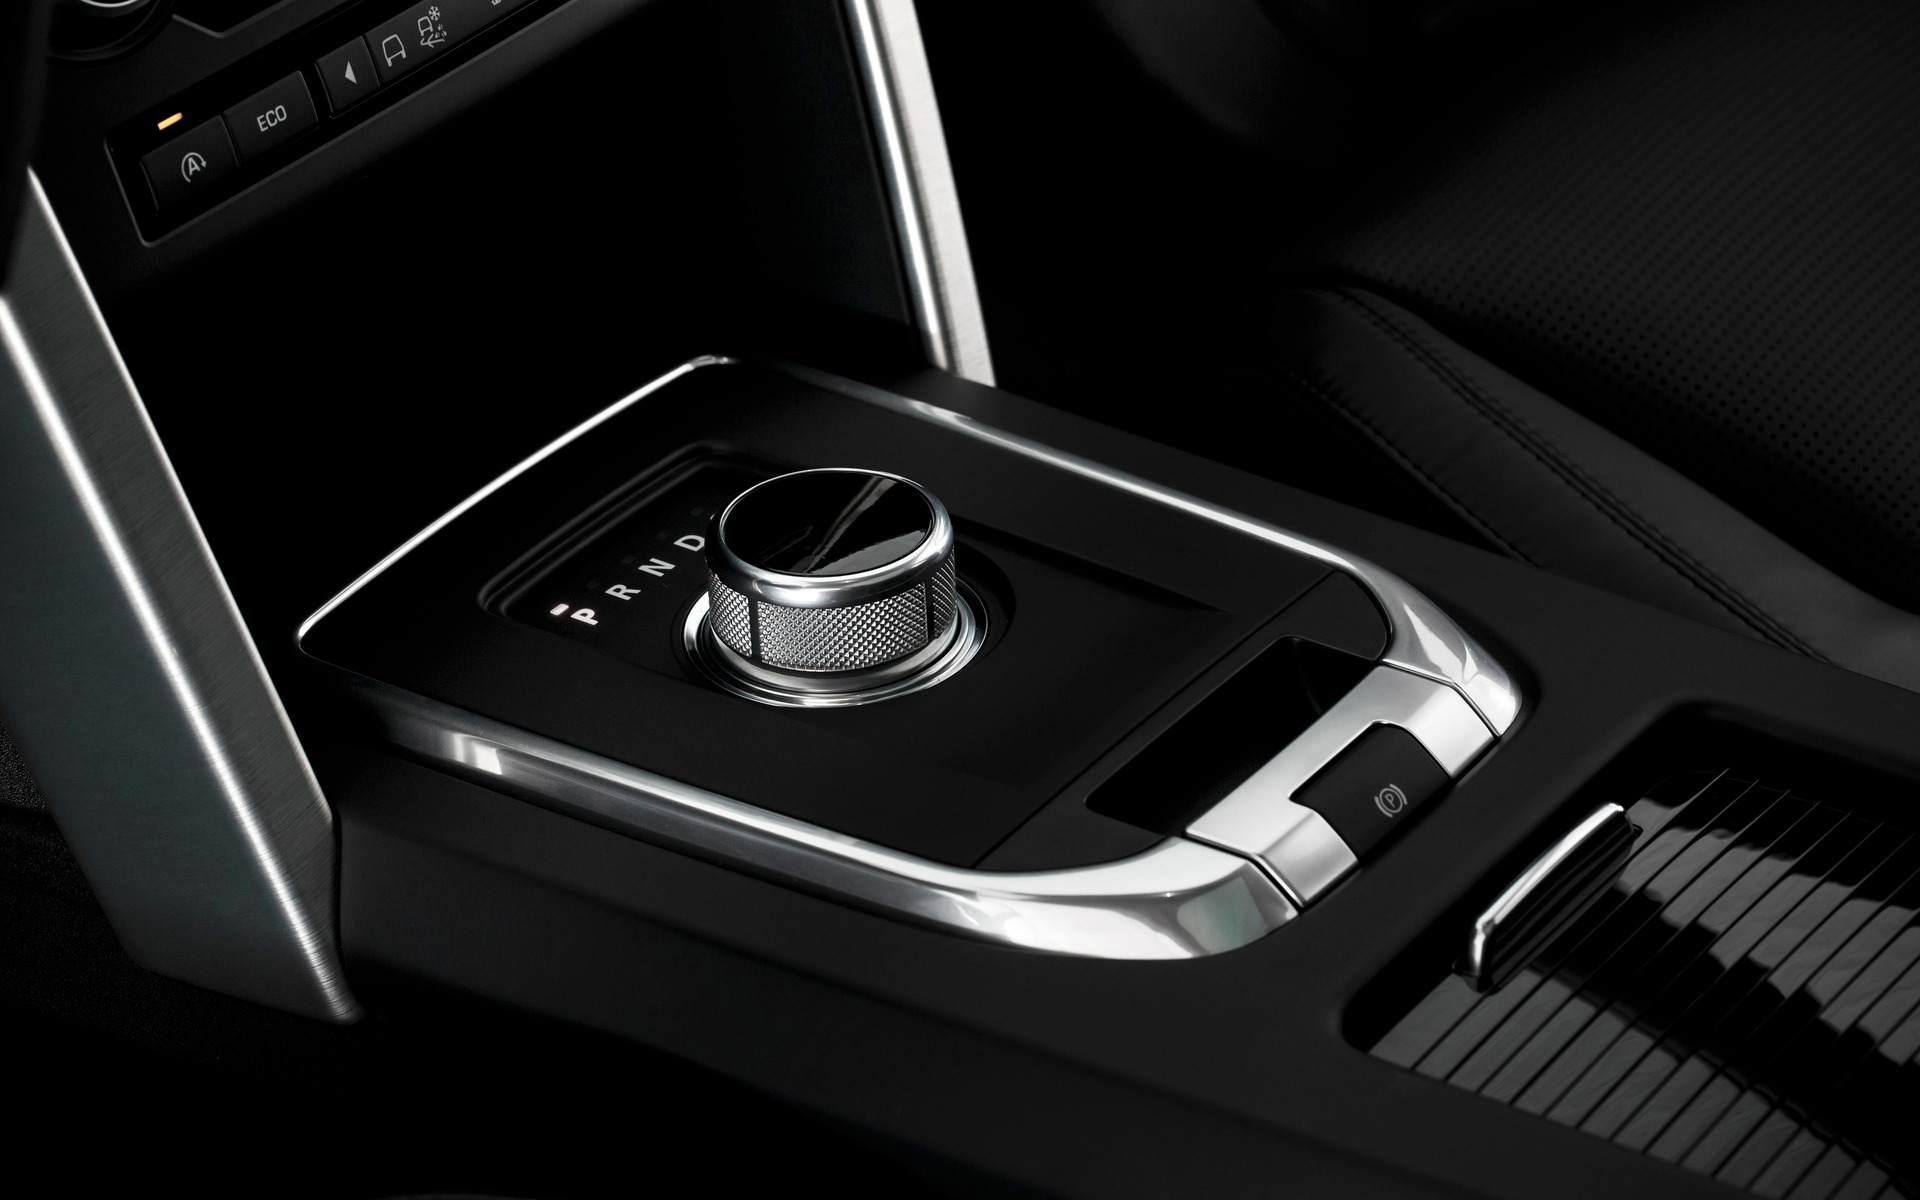 The rotary gear shift selector rises once you turn on the car.